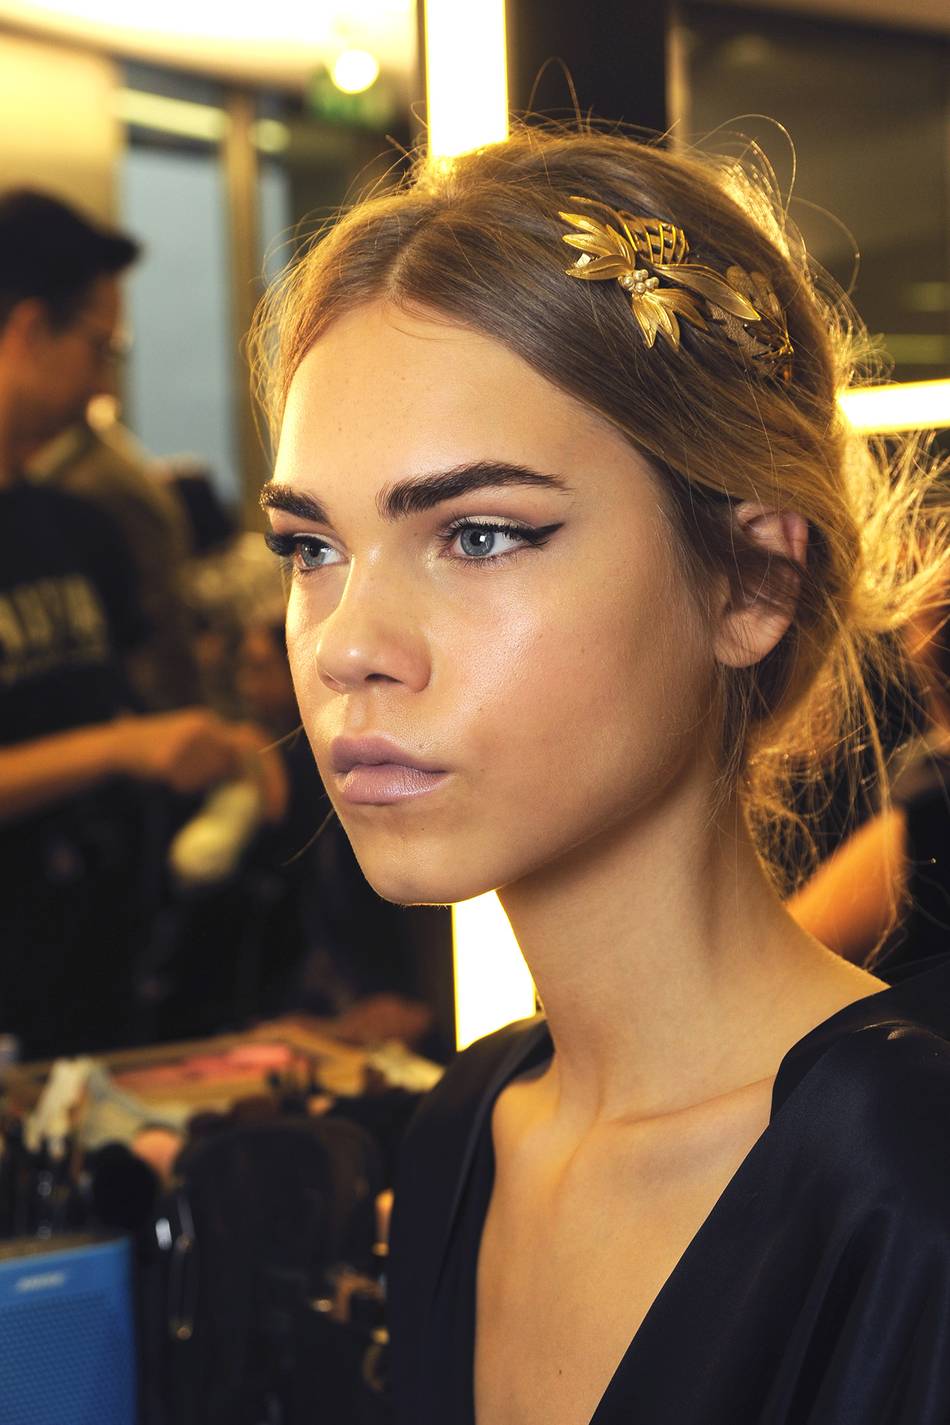 The Italian label's new make-up collection is inspired by its Fall/Winter 2015/2016 catwalk presentation